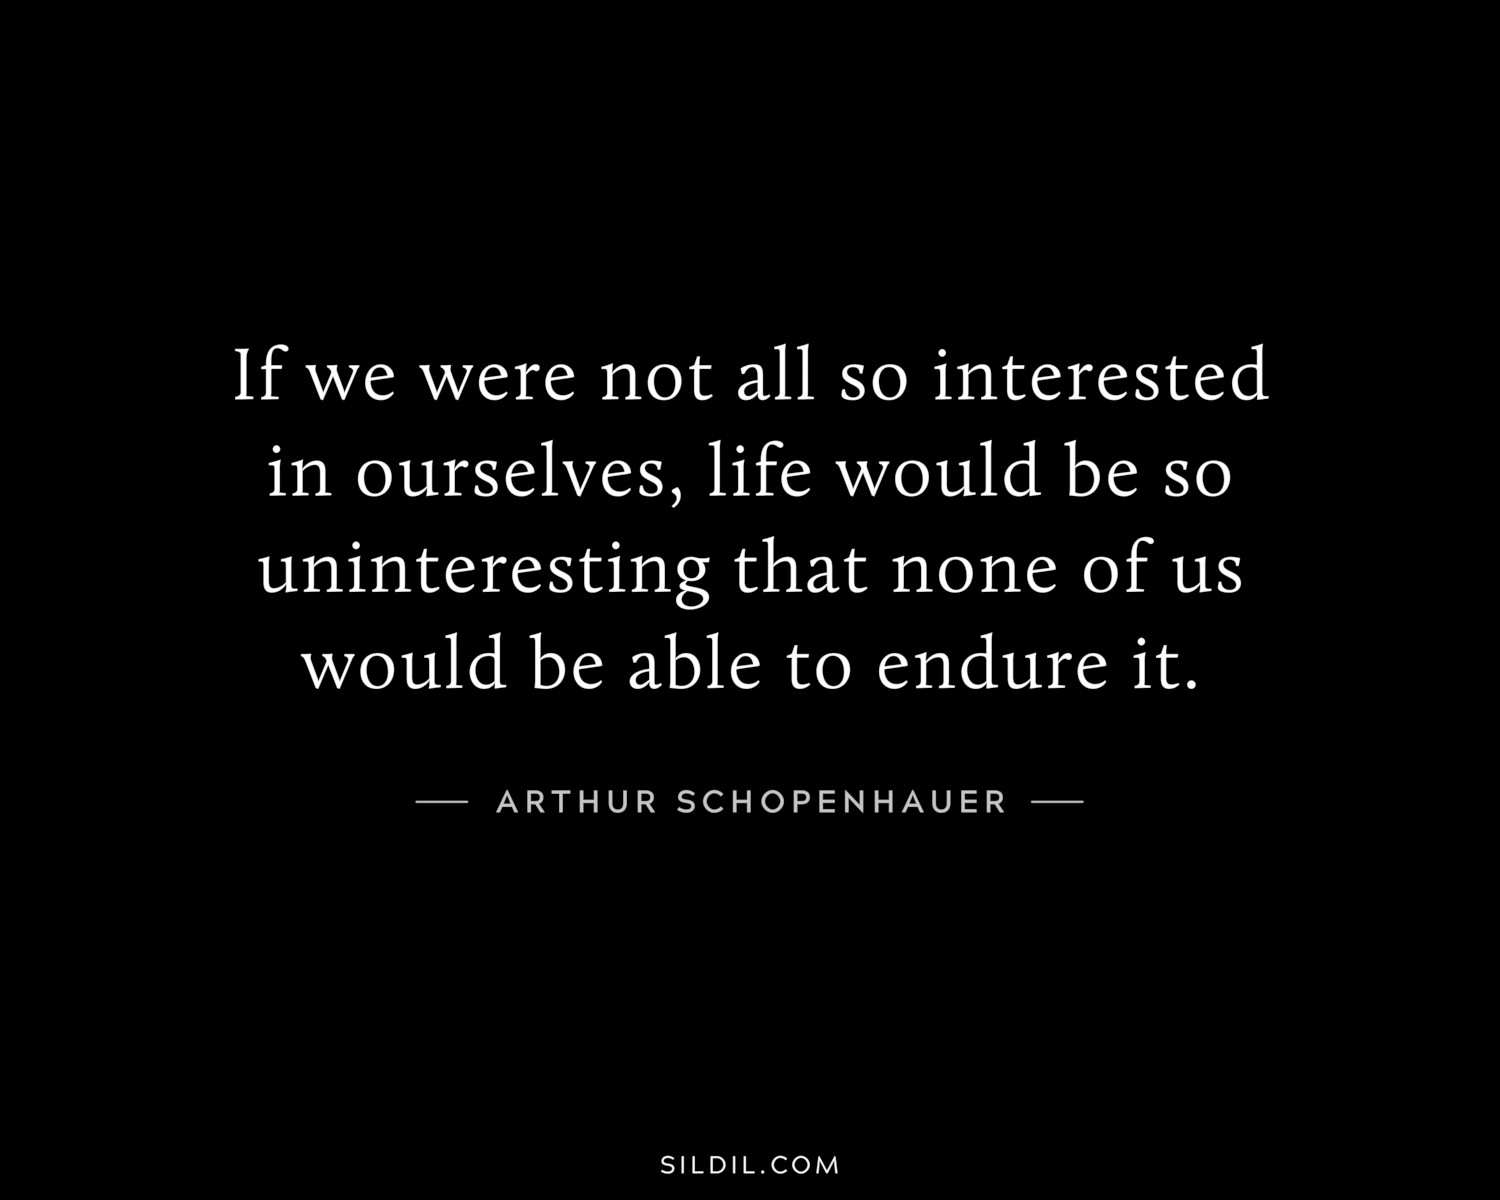 If we were not all so interested in ourselves, life would be so uninteresting that none of us would be able to endure it.